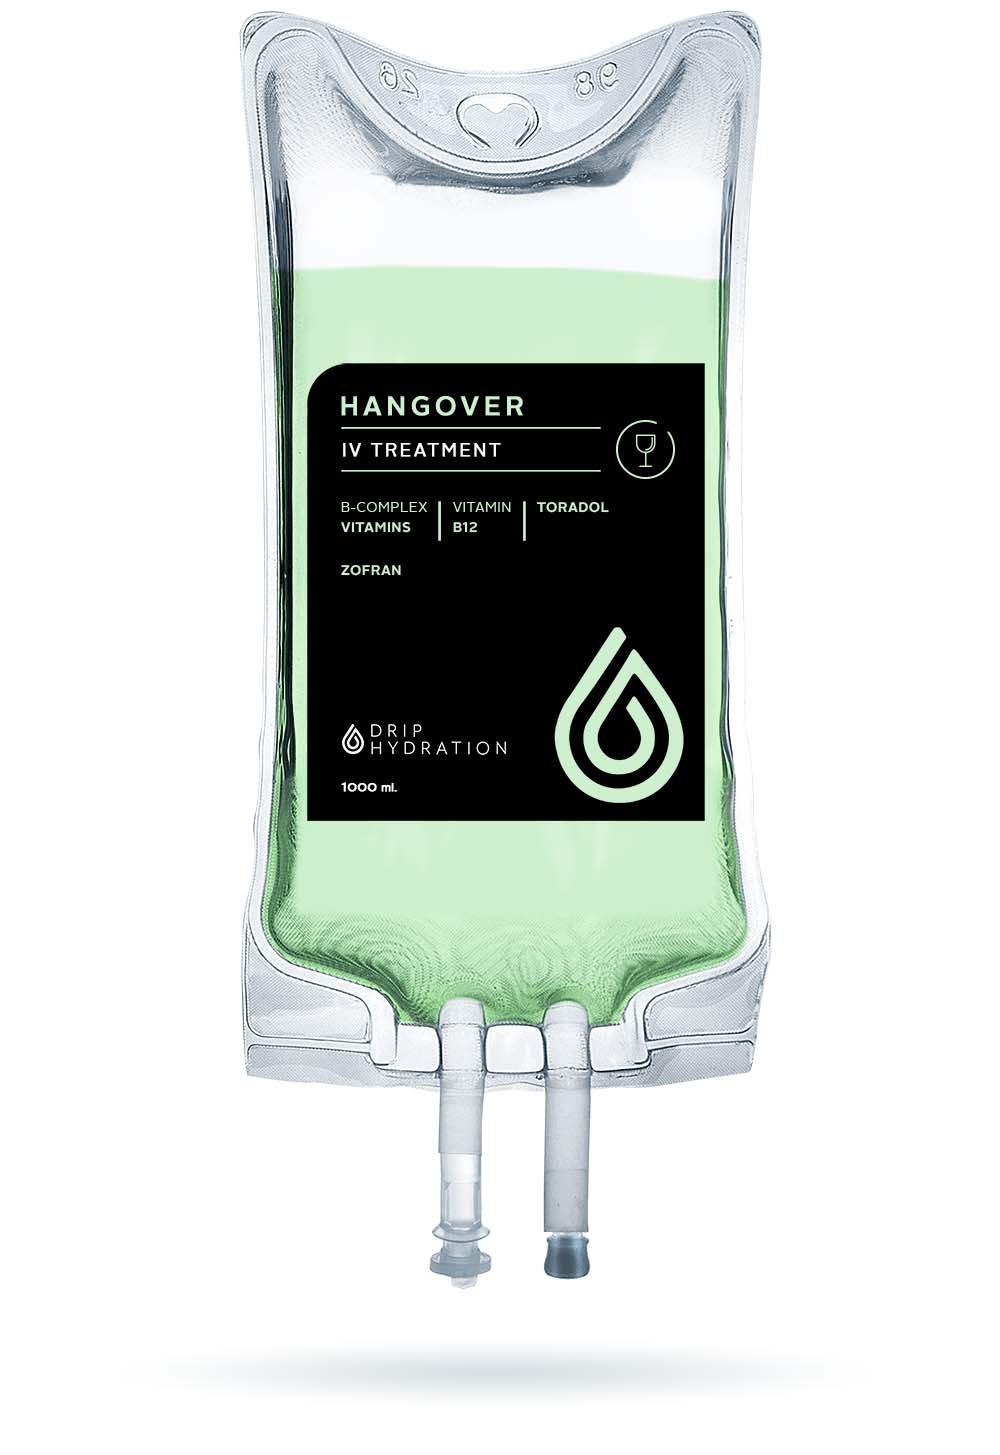 infusion bag named Hangover iv linking toward the service page